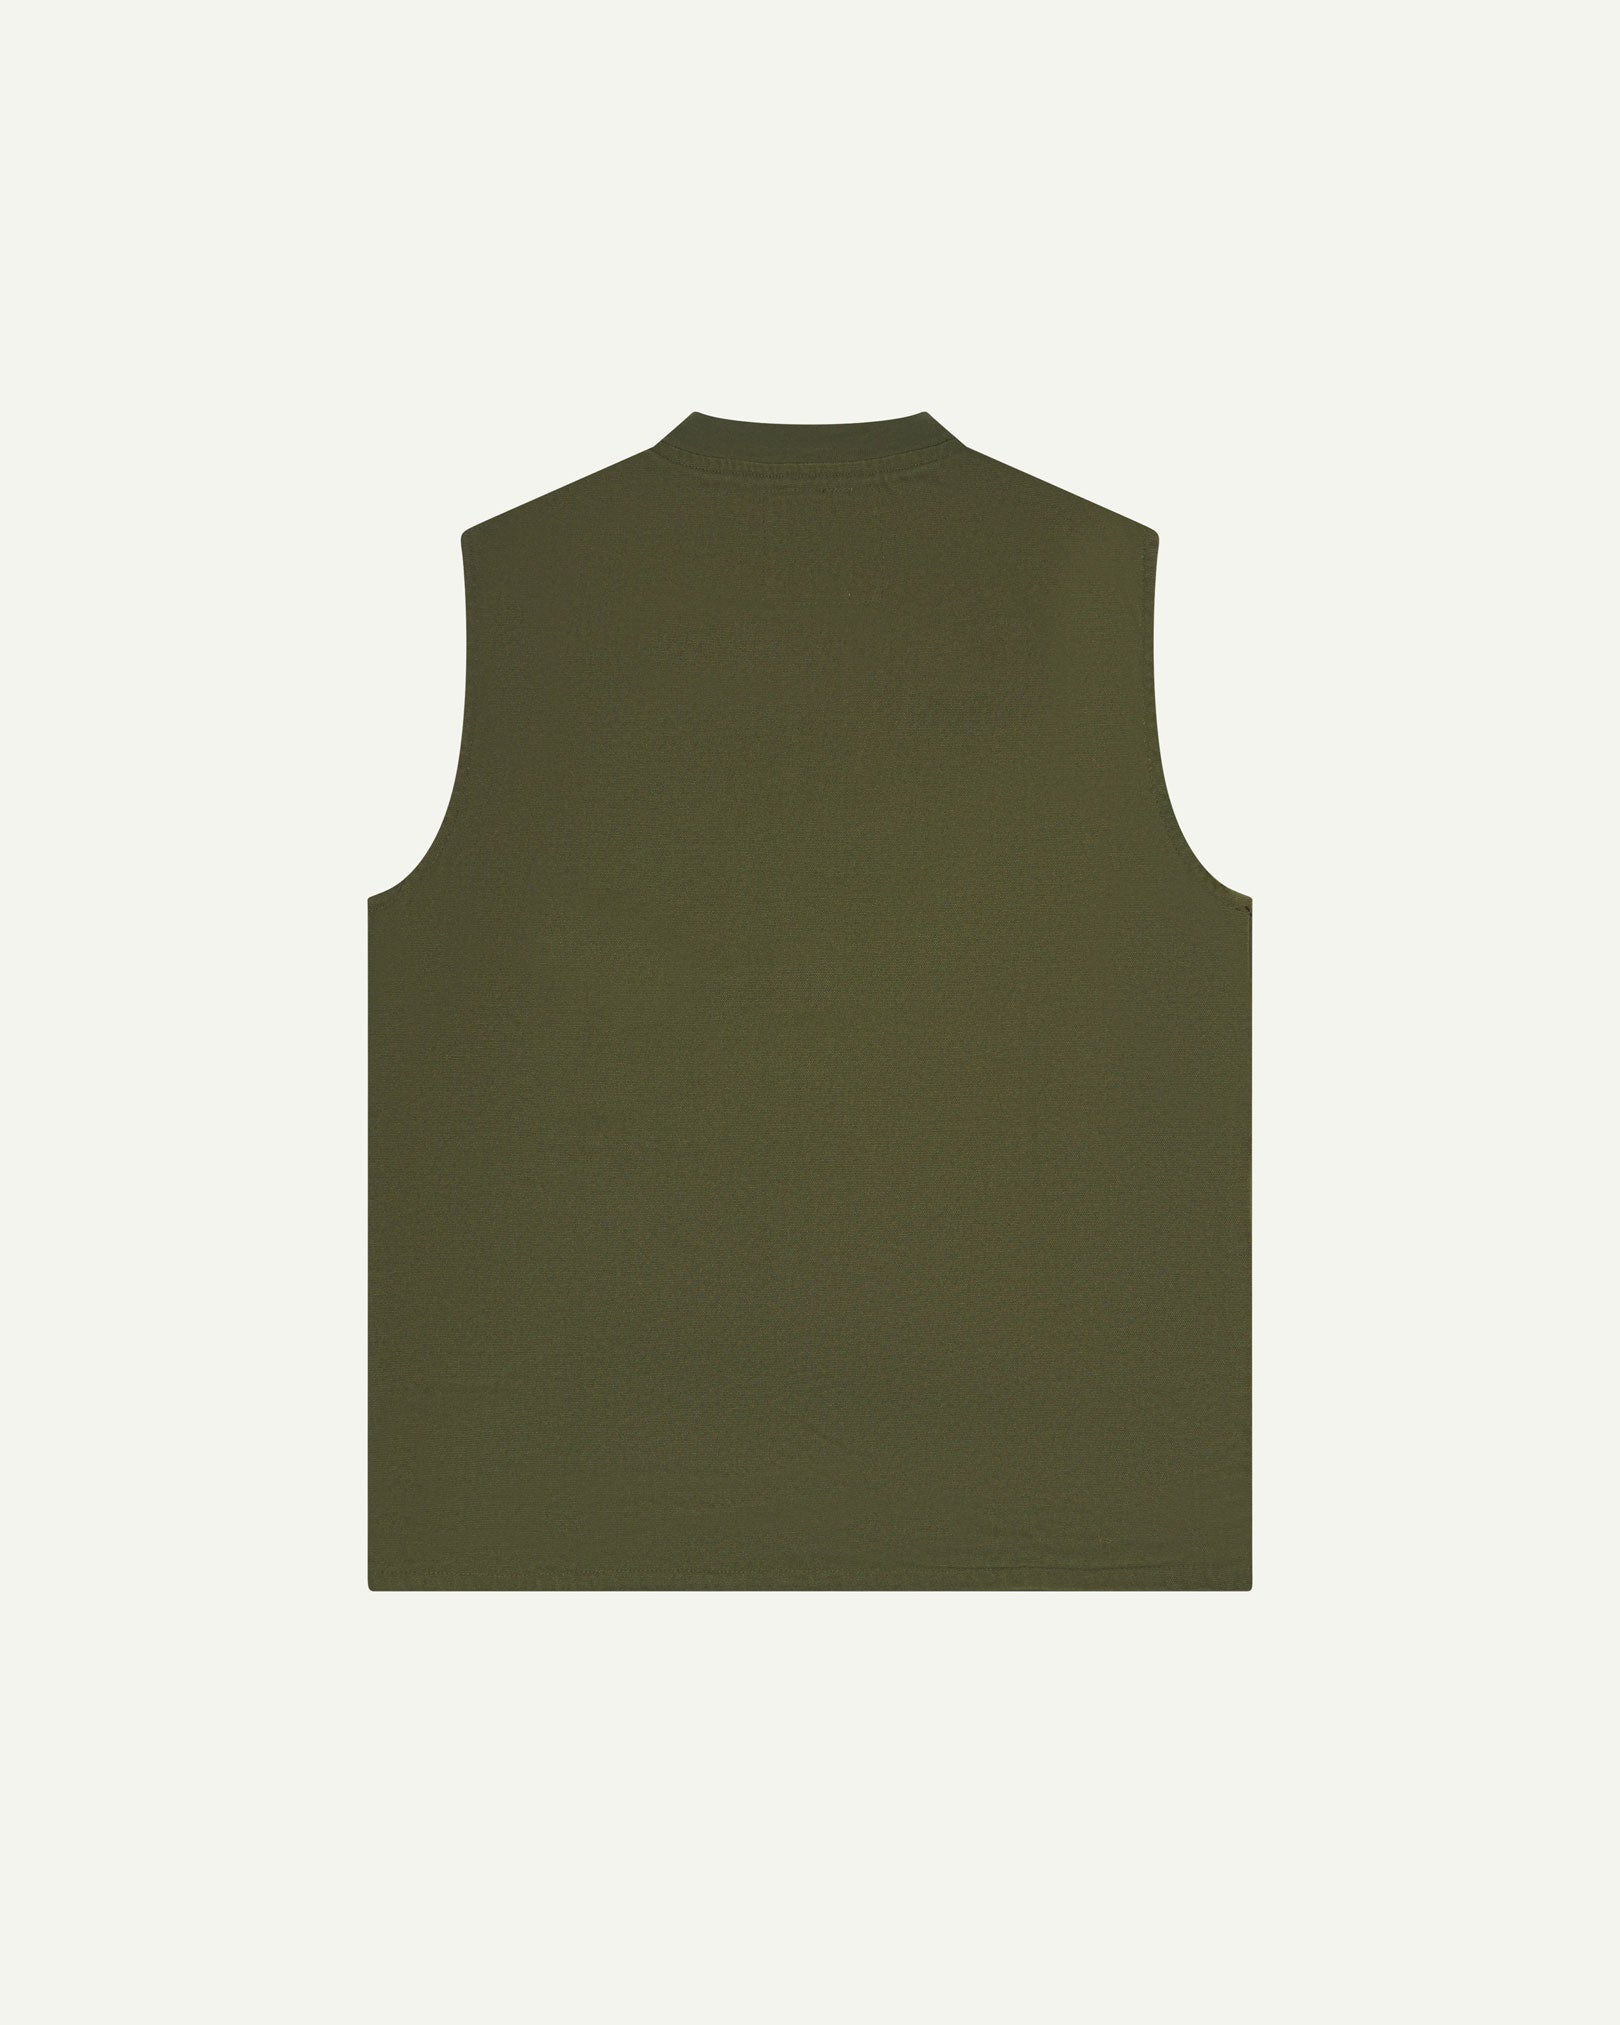 Back view of Uskees coriander green gilet-style zip-front waistcoat, showing jersey cotton collar.